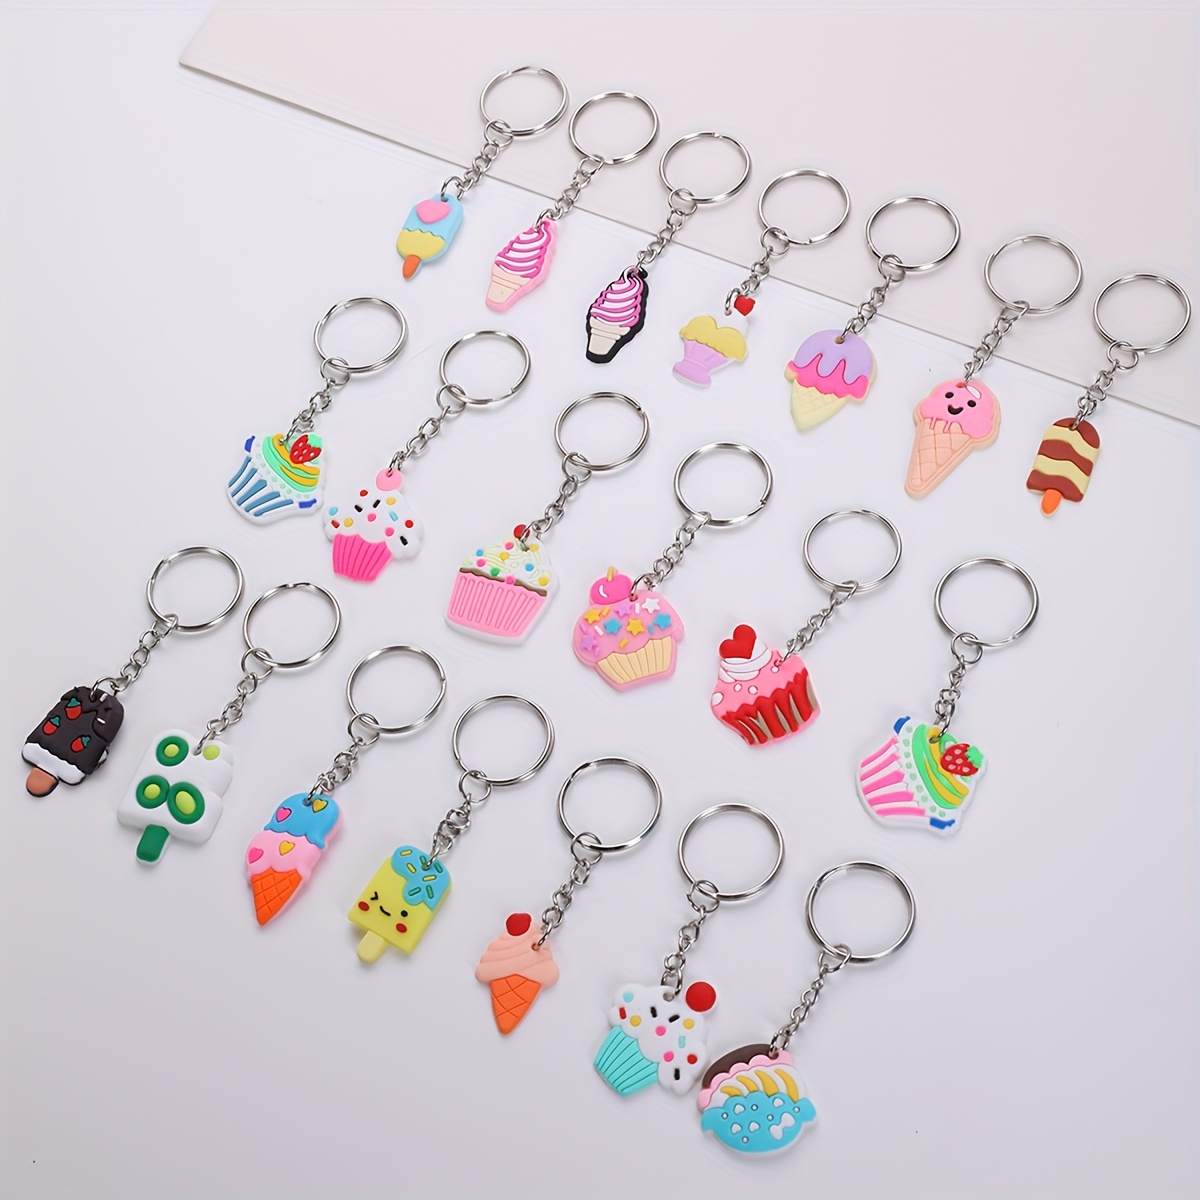 

20 Pcs Cartoon Ice Cream Keychains, Fashionable Unisex Casual Cute Key Rings, Assorted Designs For Wallet, Backpack, Luggage Accessories, Festive Party Favors